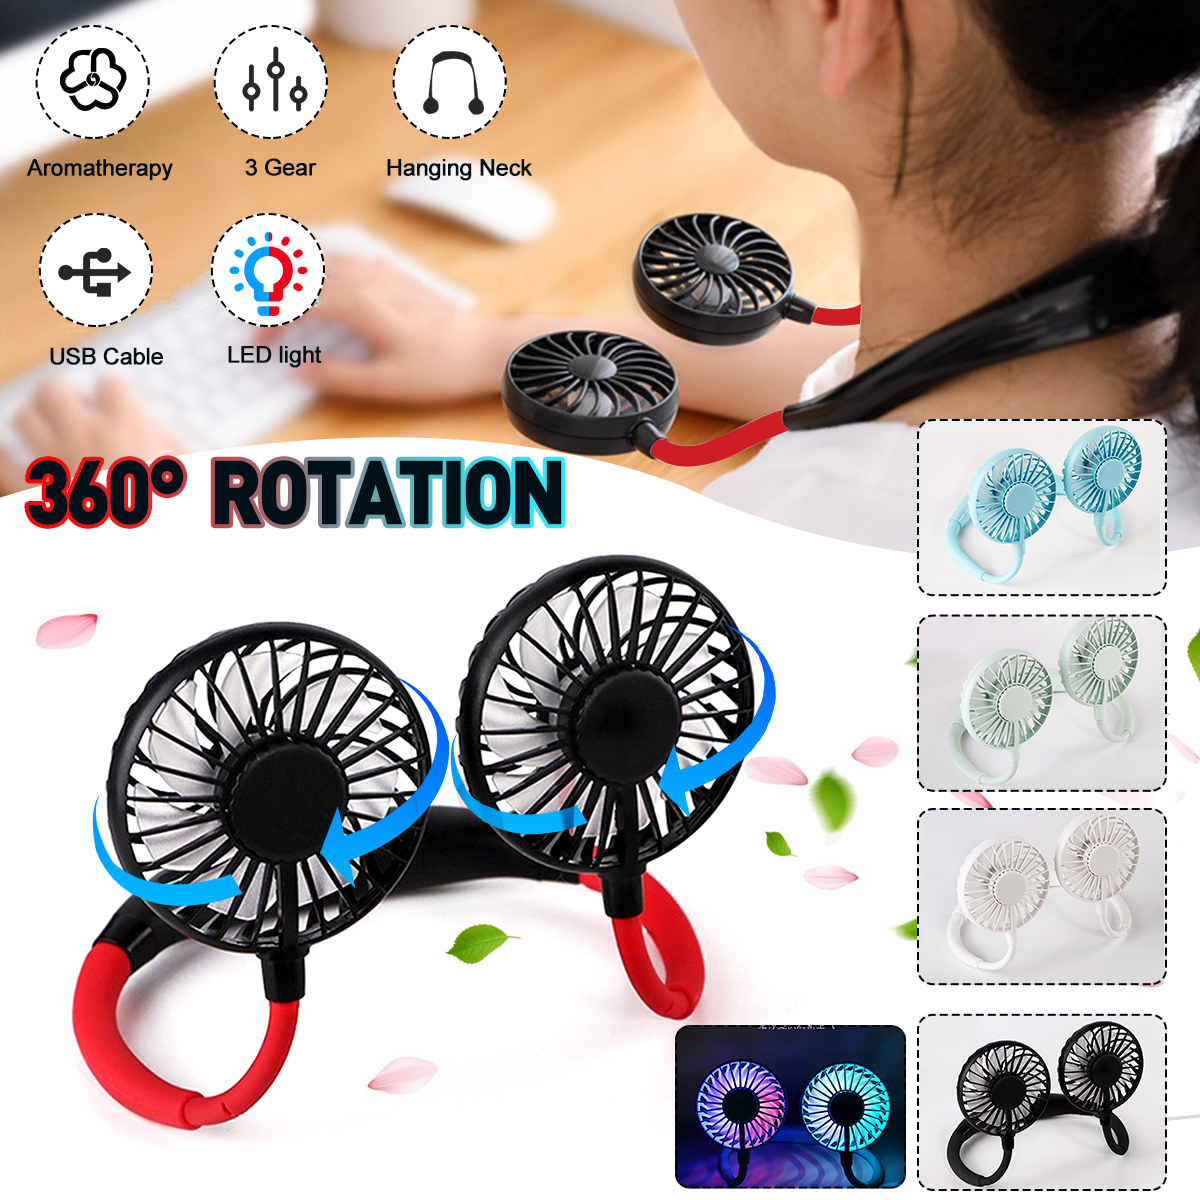 1200mah-3-Gear-LED-USB-Rechargeable-Portable-Hanging-Neck-Fan-Rechargeable-Aromatherapy-Cooling-Fan--1716094-2